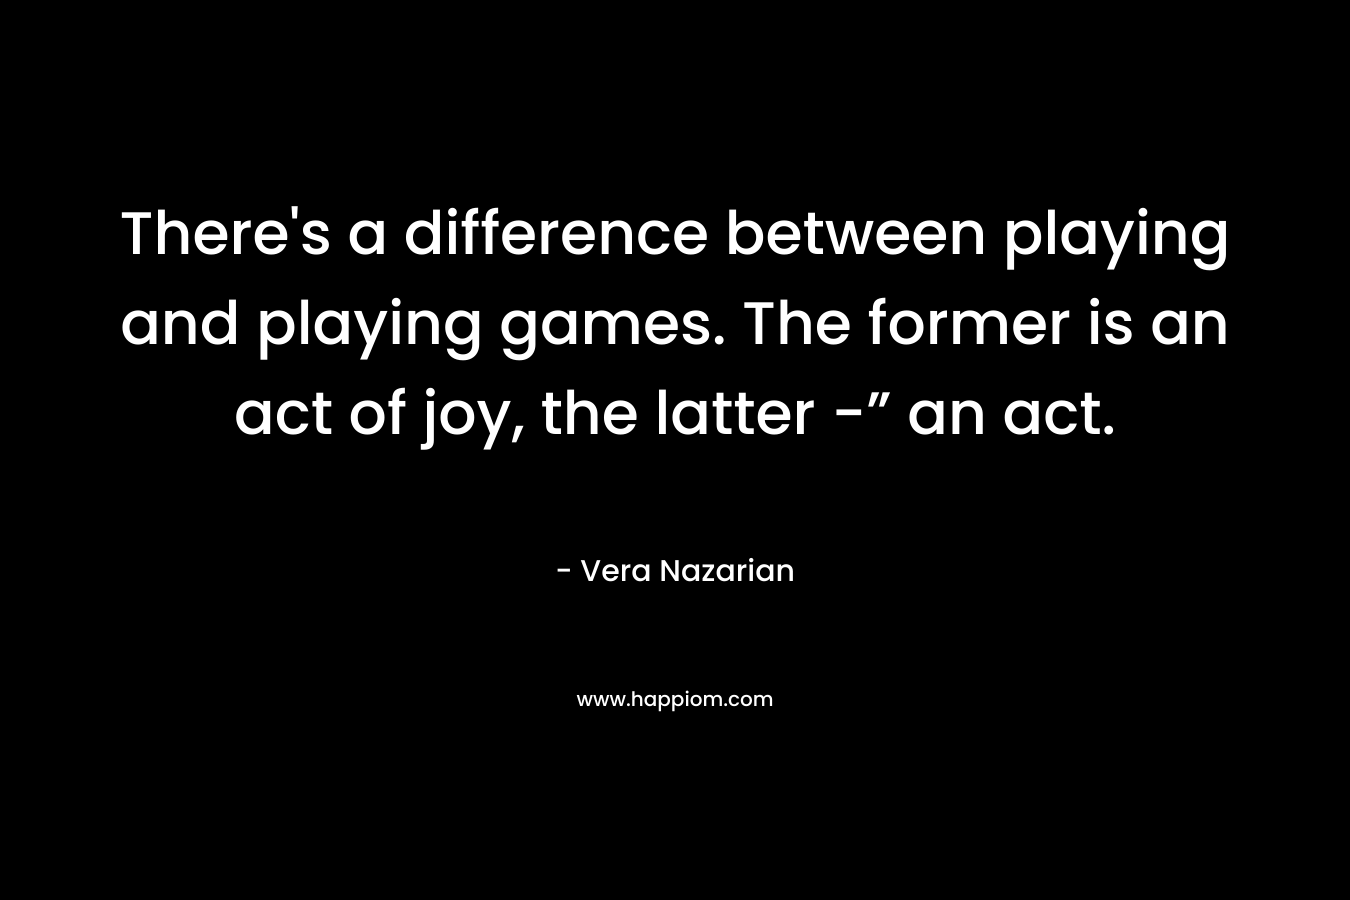 There’s a difference between playing and playing games. The former is an act of joy, the latter -” an act. – Vera Nazarian